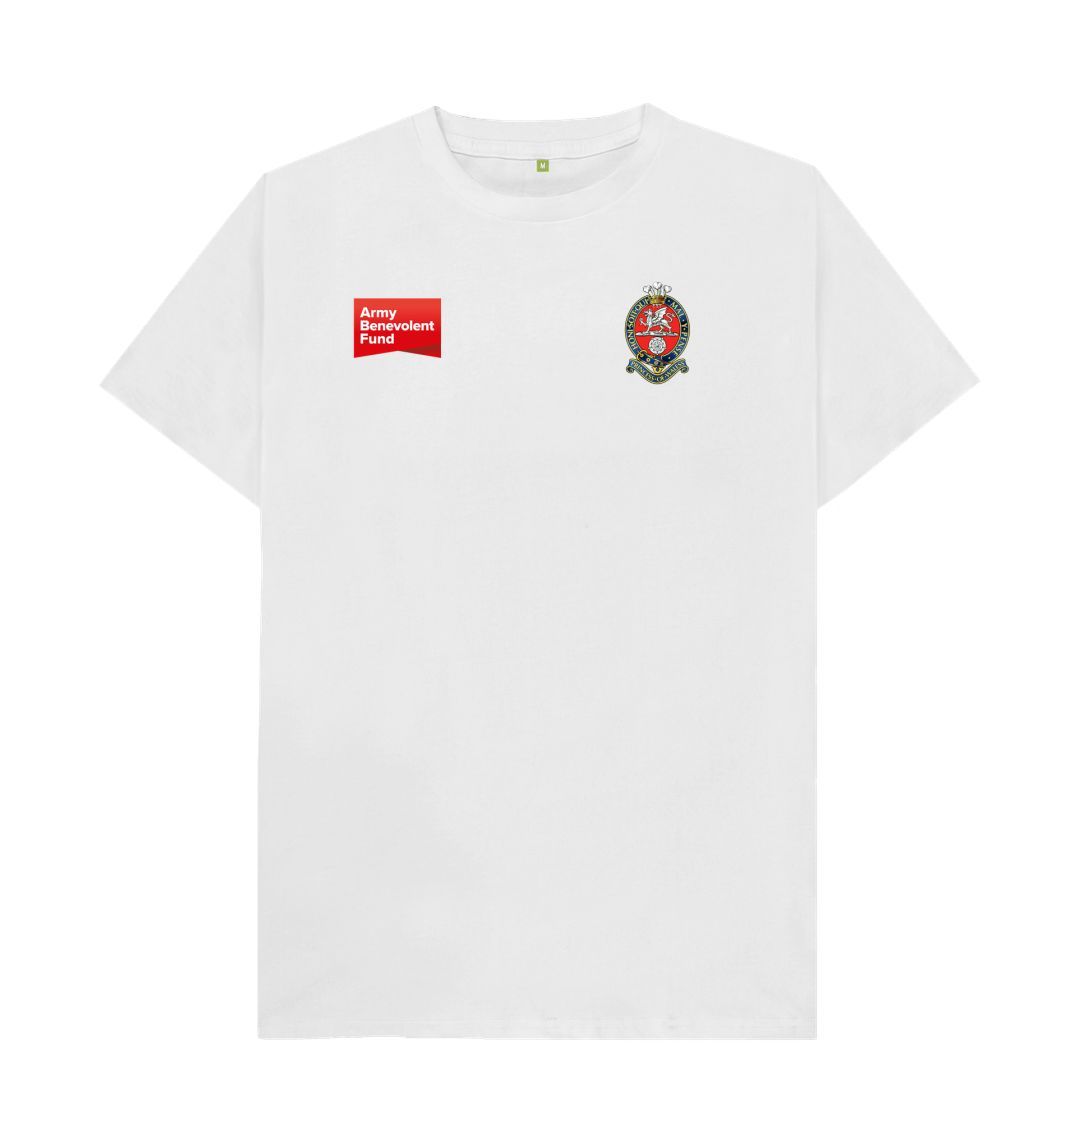 The Princess of Wales's Royal Regiment Unisex T-shirt - Army Benevolent Fund